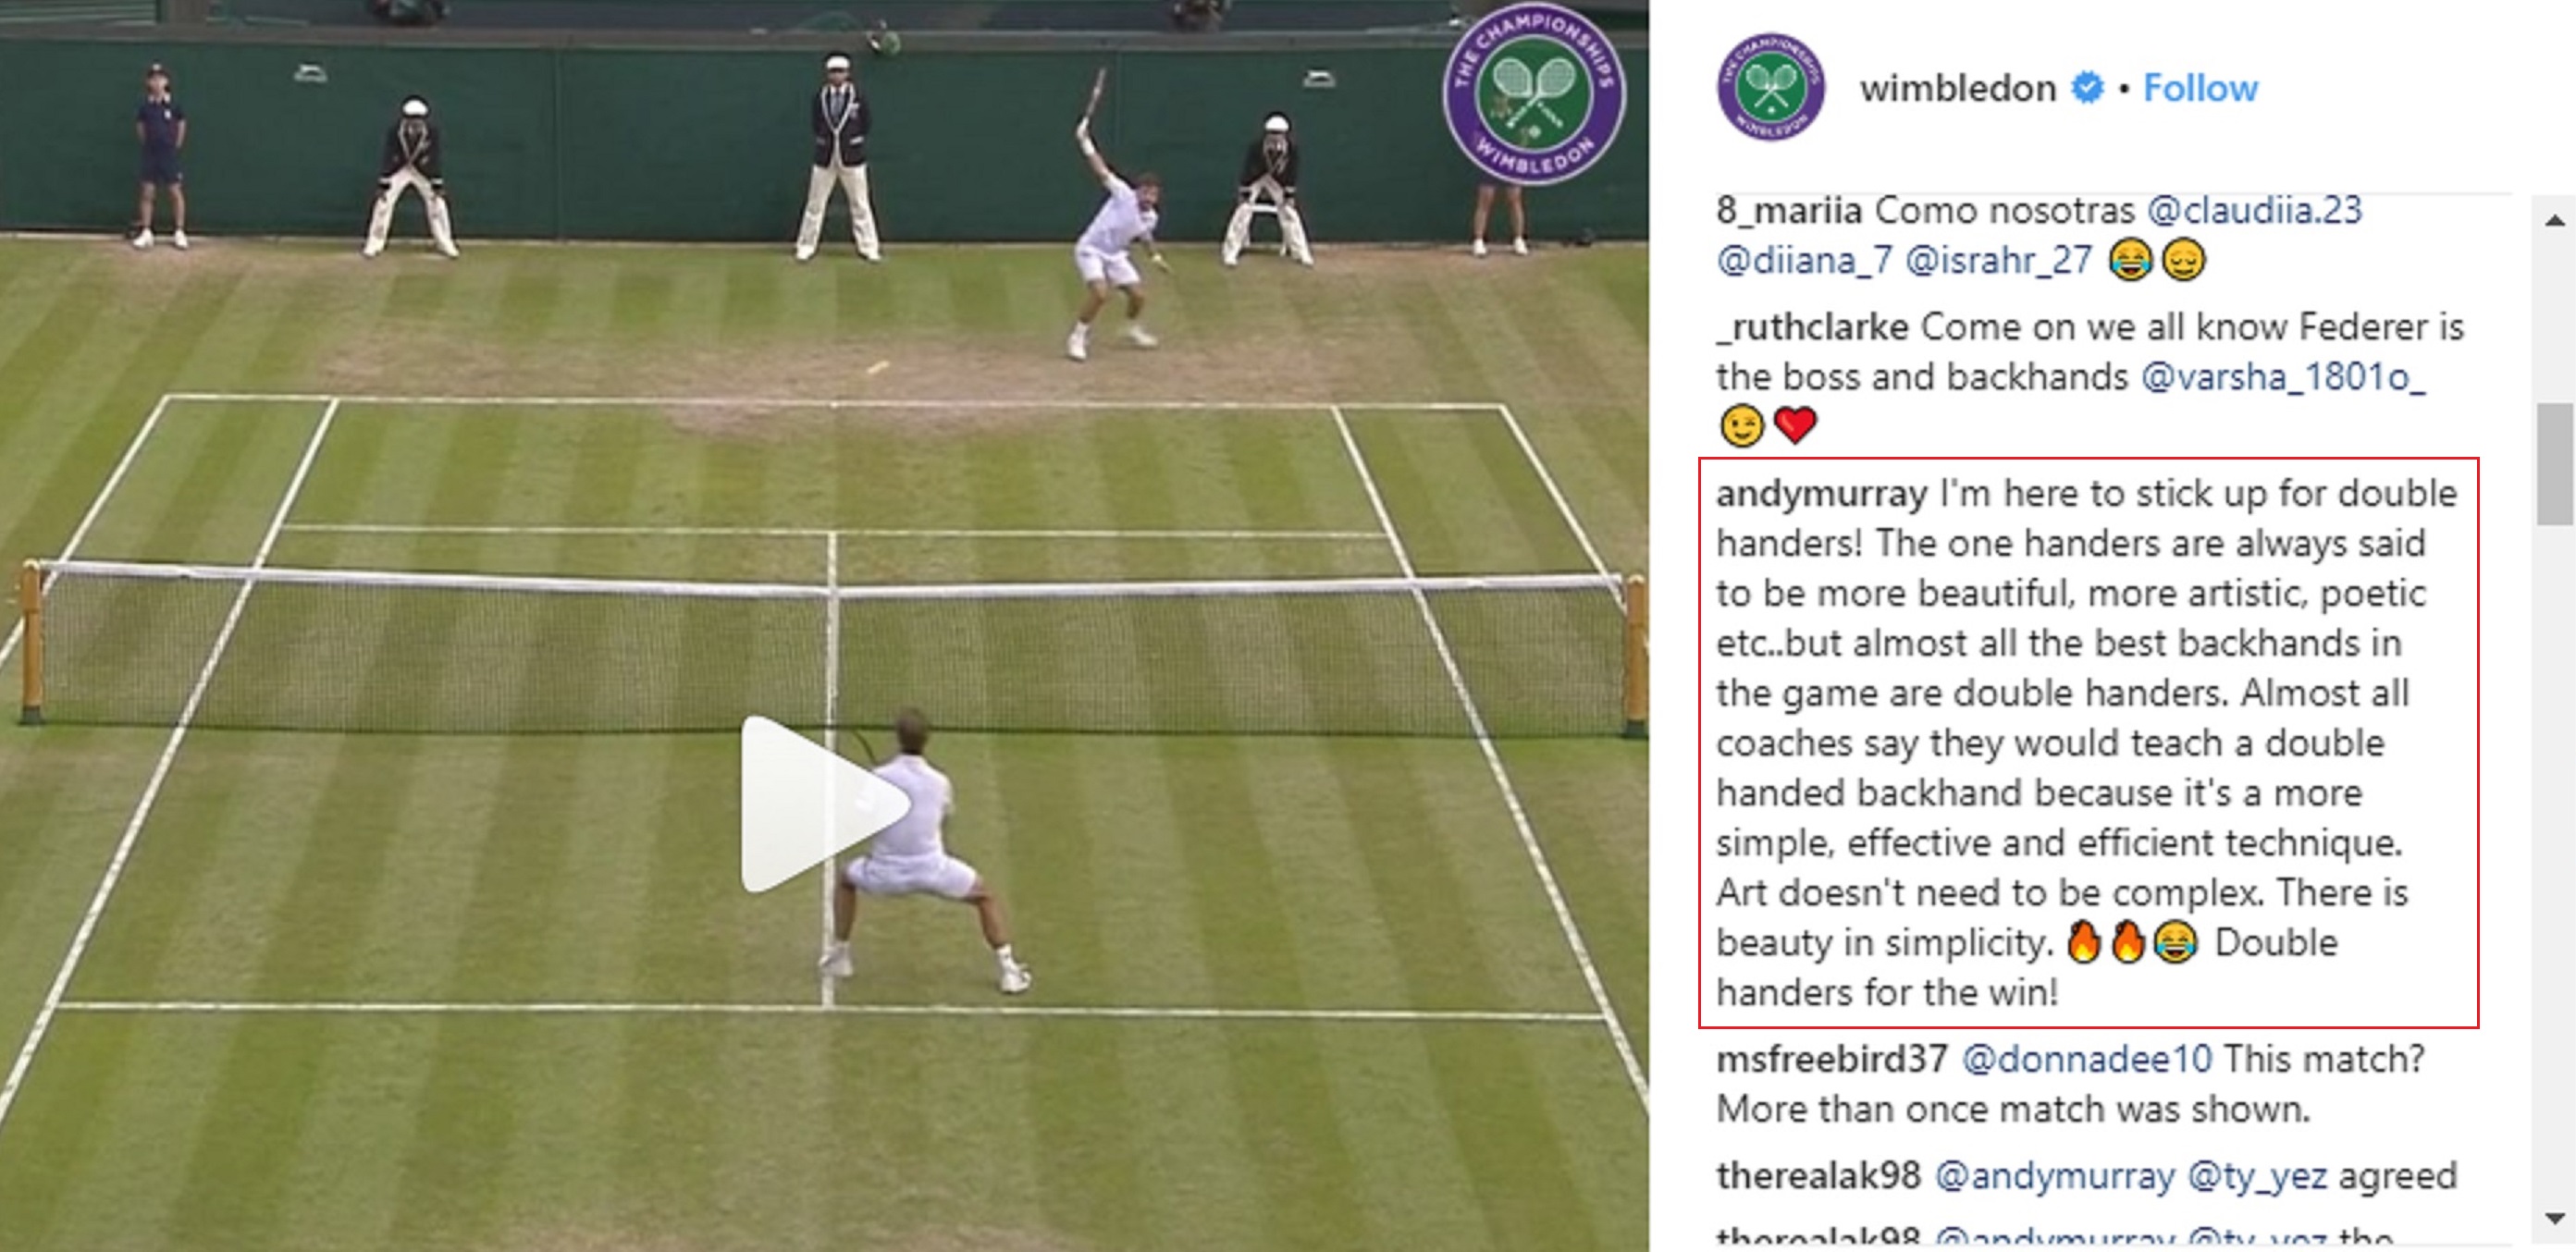 A screen grab from Wimbledon's official Instagram page